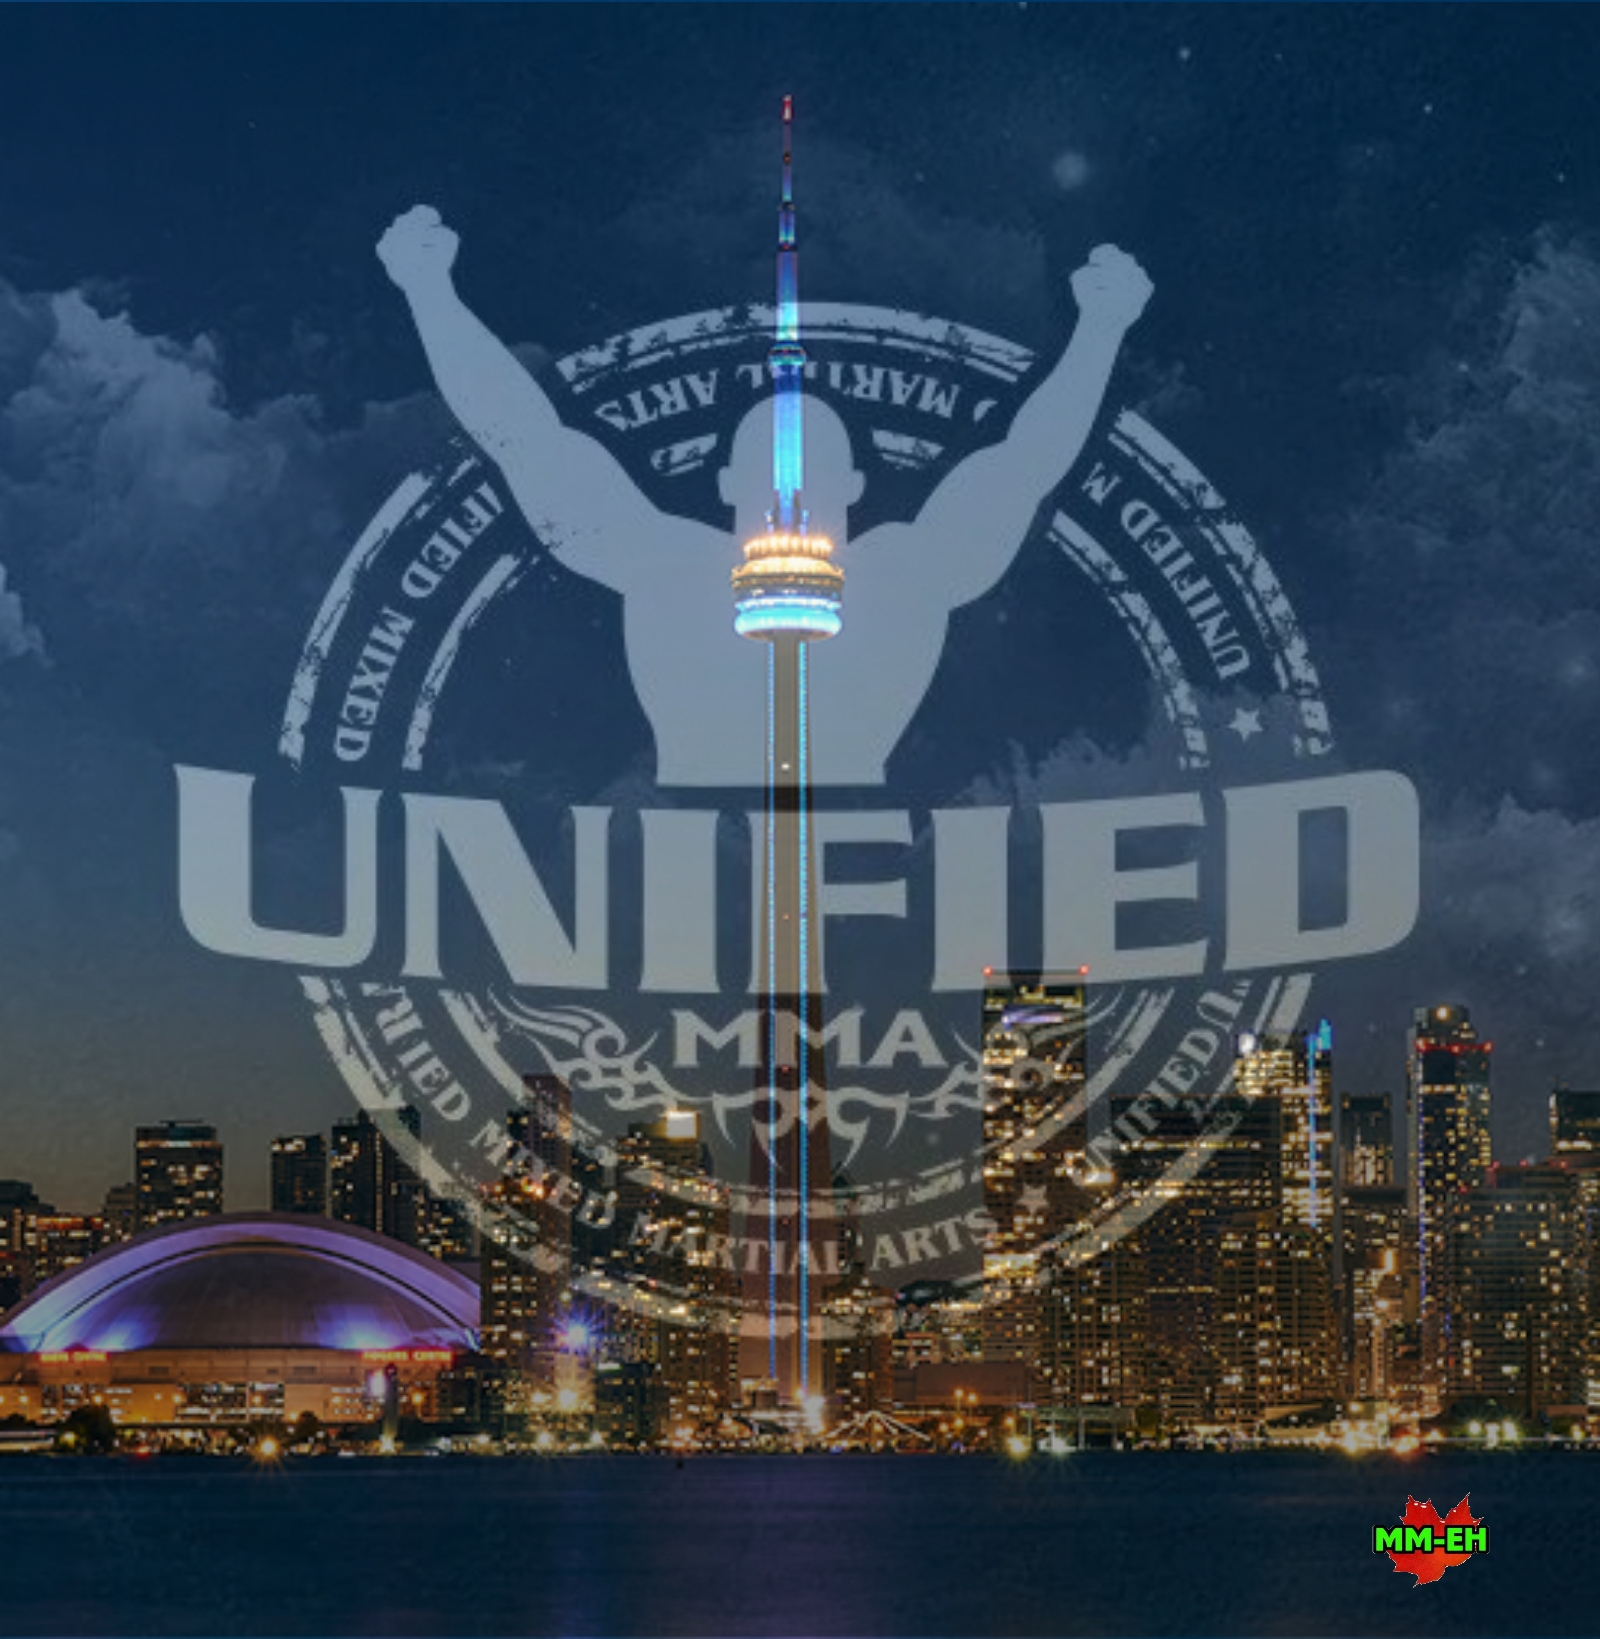 EXCLUSIVE — Unified MMA Starts Expansion Plans With Toronto Show